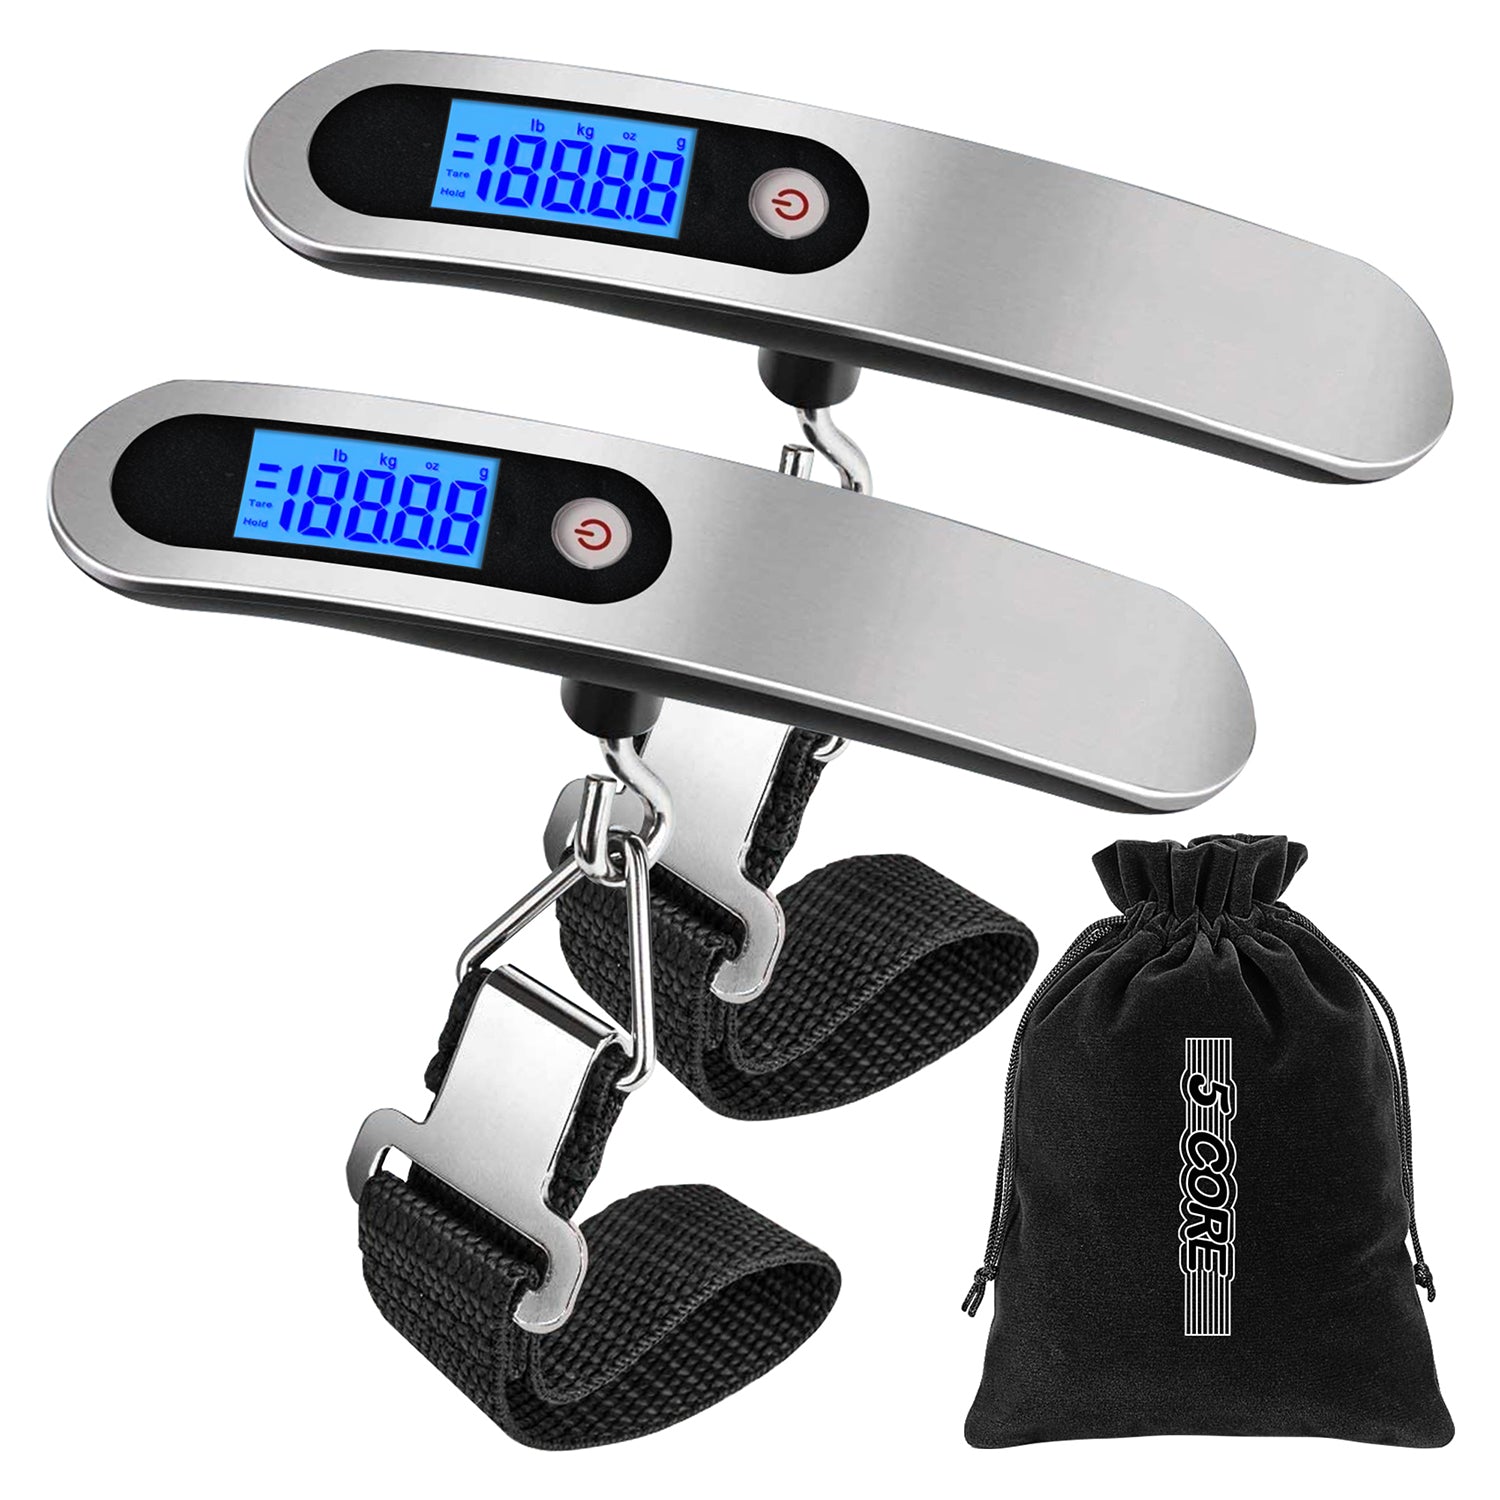 5 Core Luggage Scale 2 Piece 110 Pounds Digital Hanging Weight Scale w Backlight Rubber Paint Handle Battery Included- LS-005 2 PCS